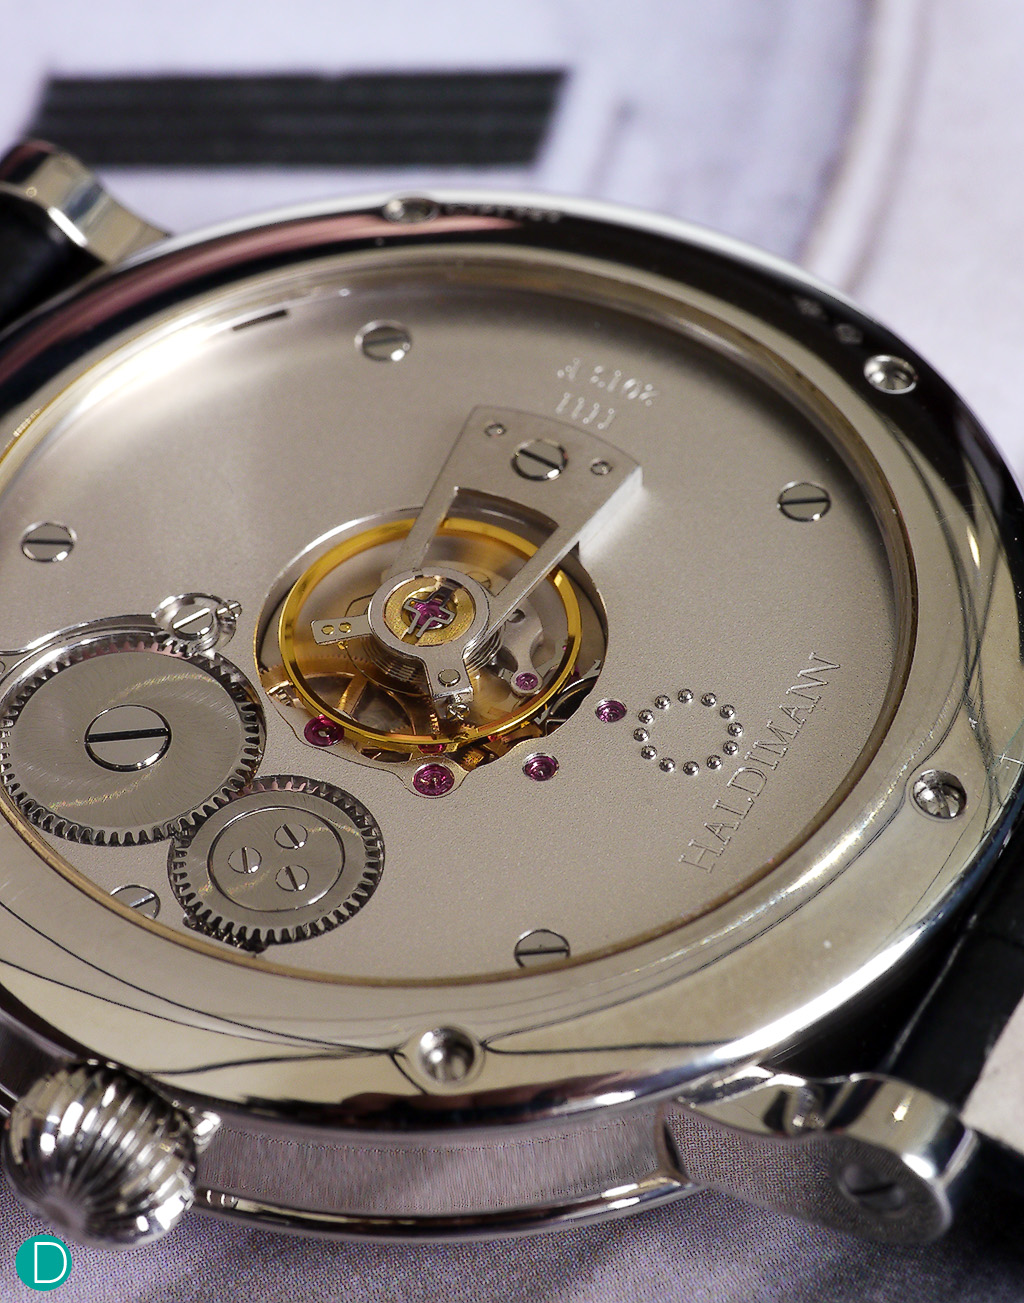 The Haldimann H11 caseback, with the balance centrally mounted.